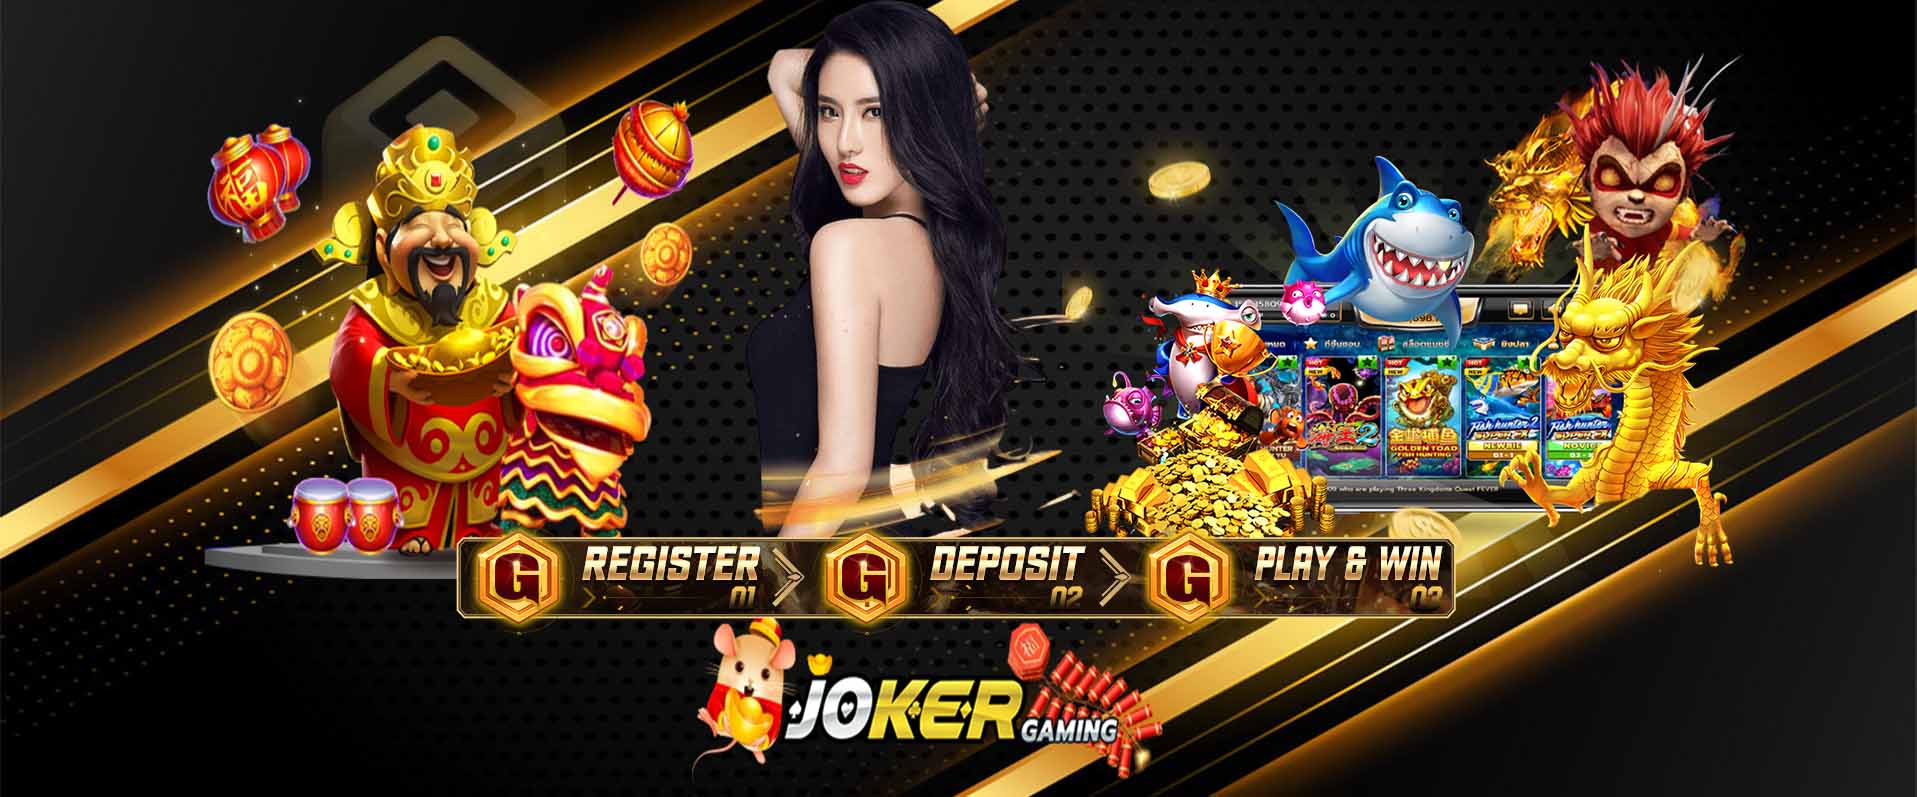 Ensure Joker Gaming Playing Standards Comply with Agent Rules